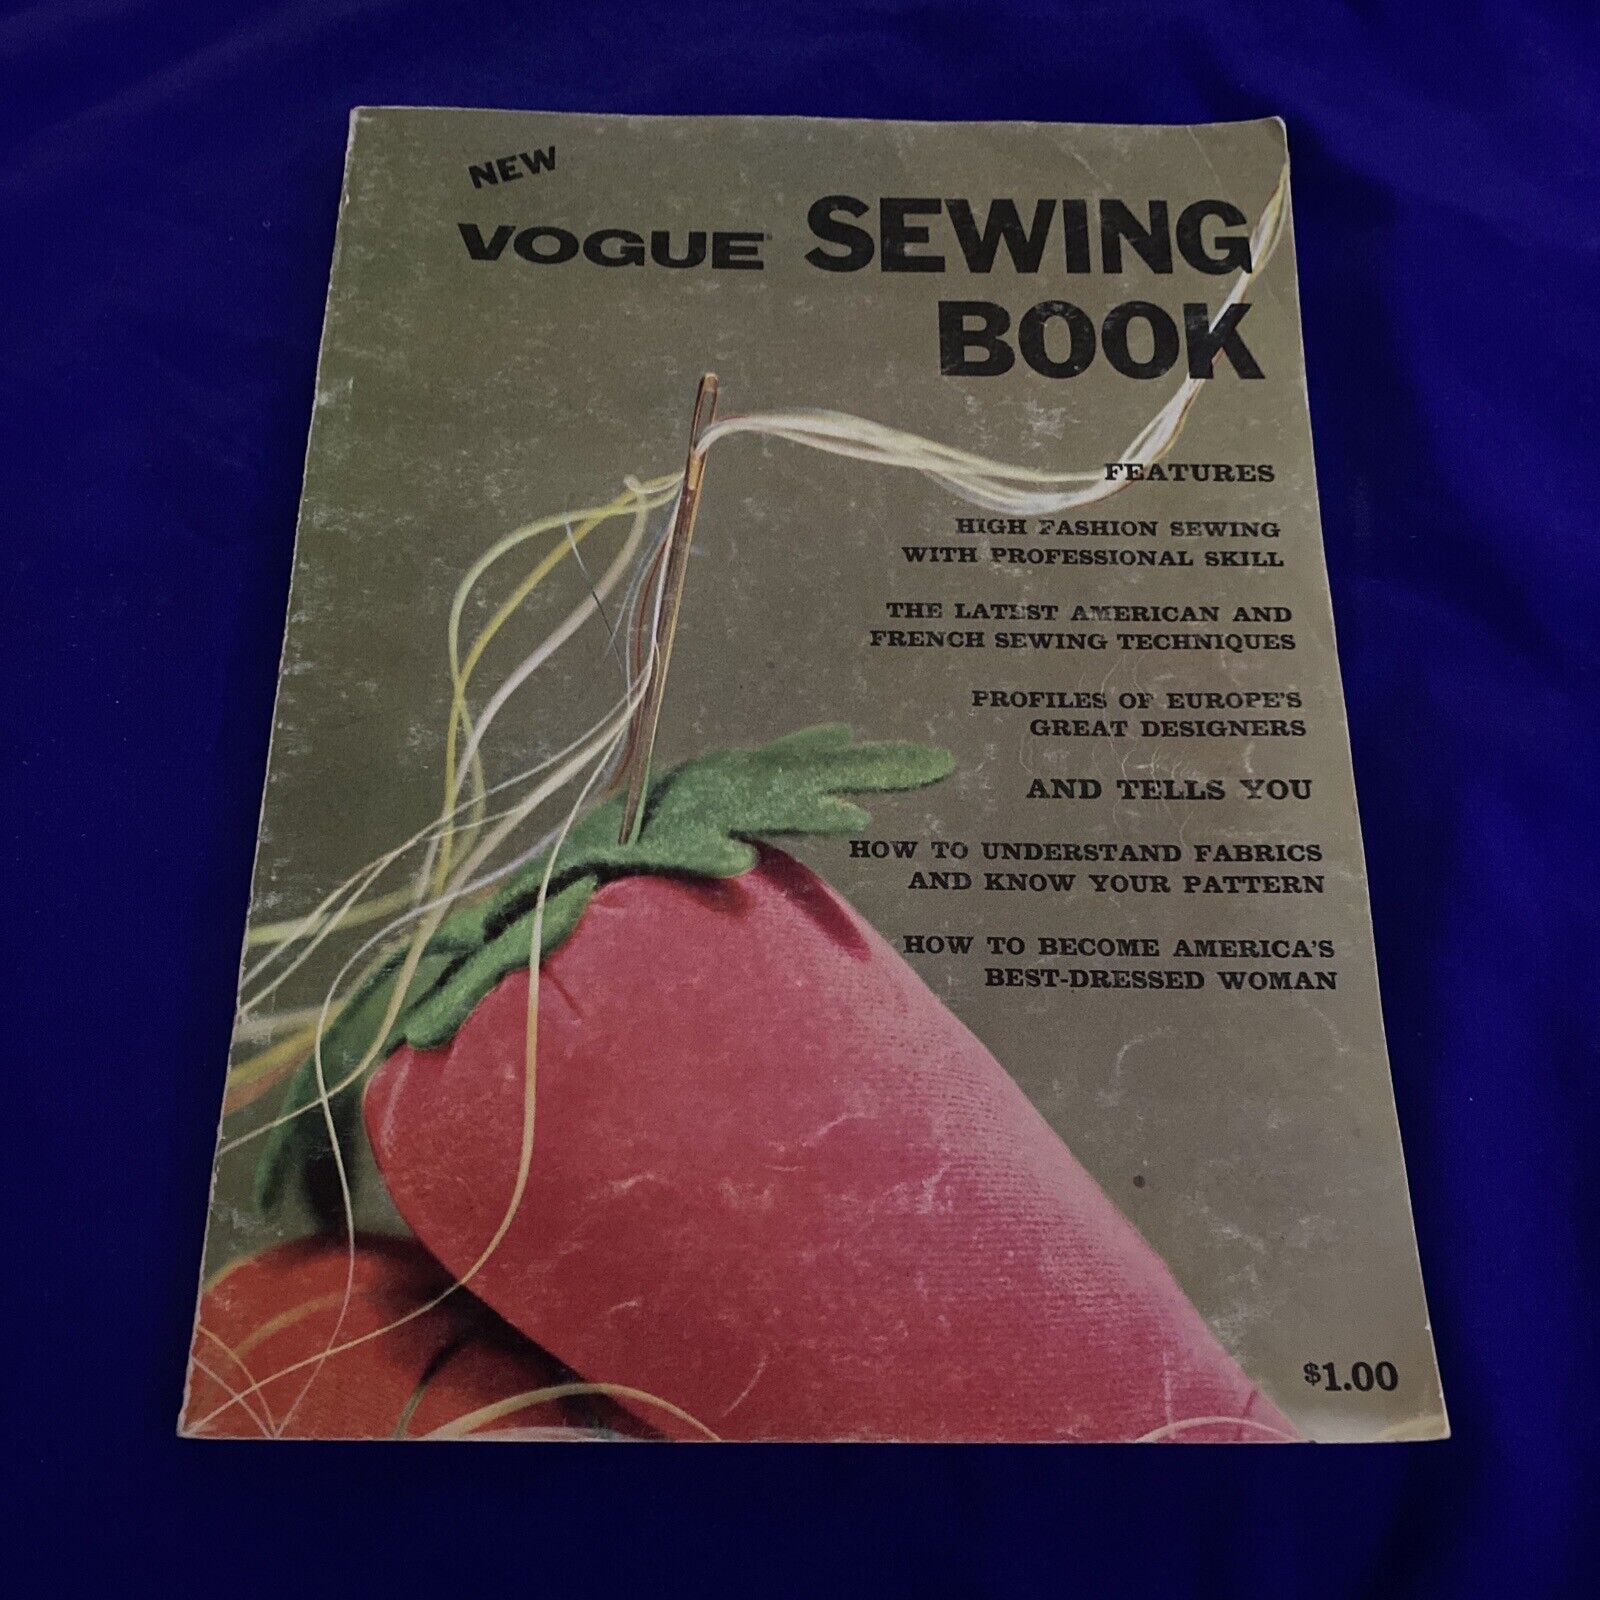 Vintage The New Vogue Sewing Book 1963 1960's Housewife Fashion